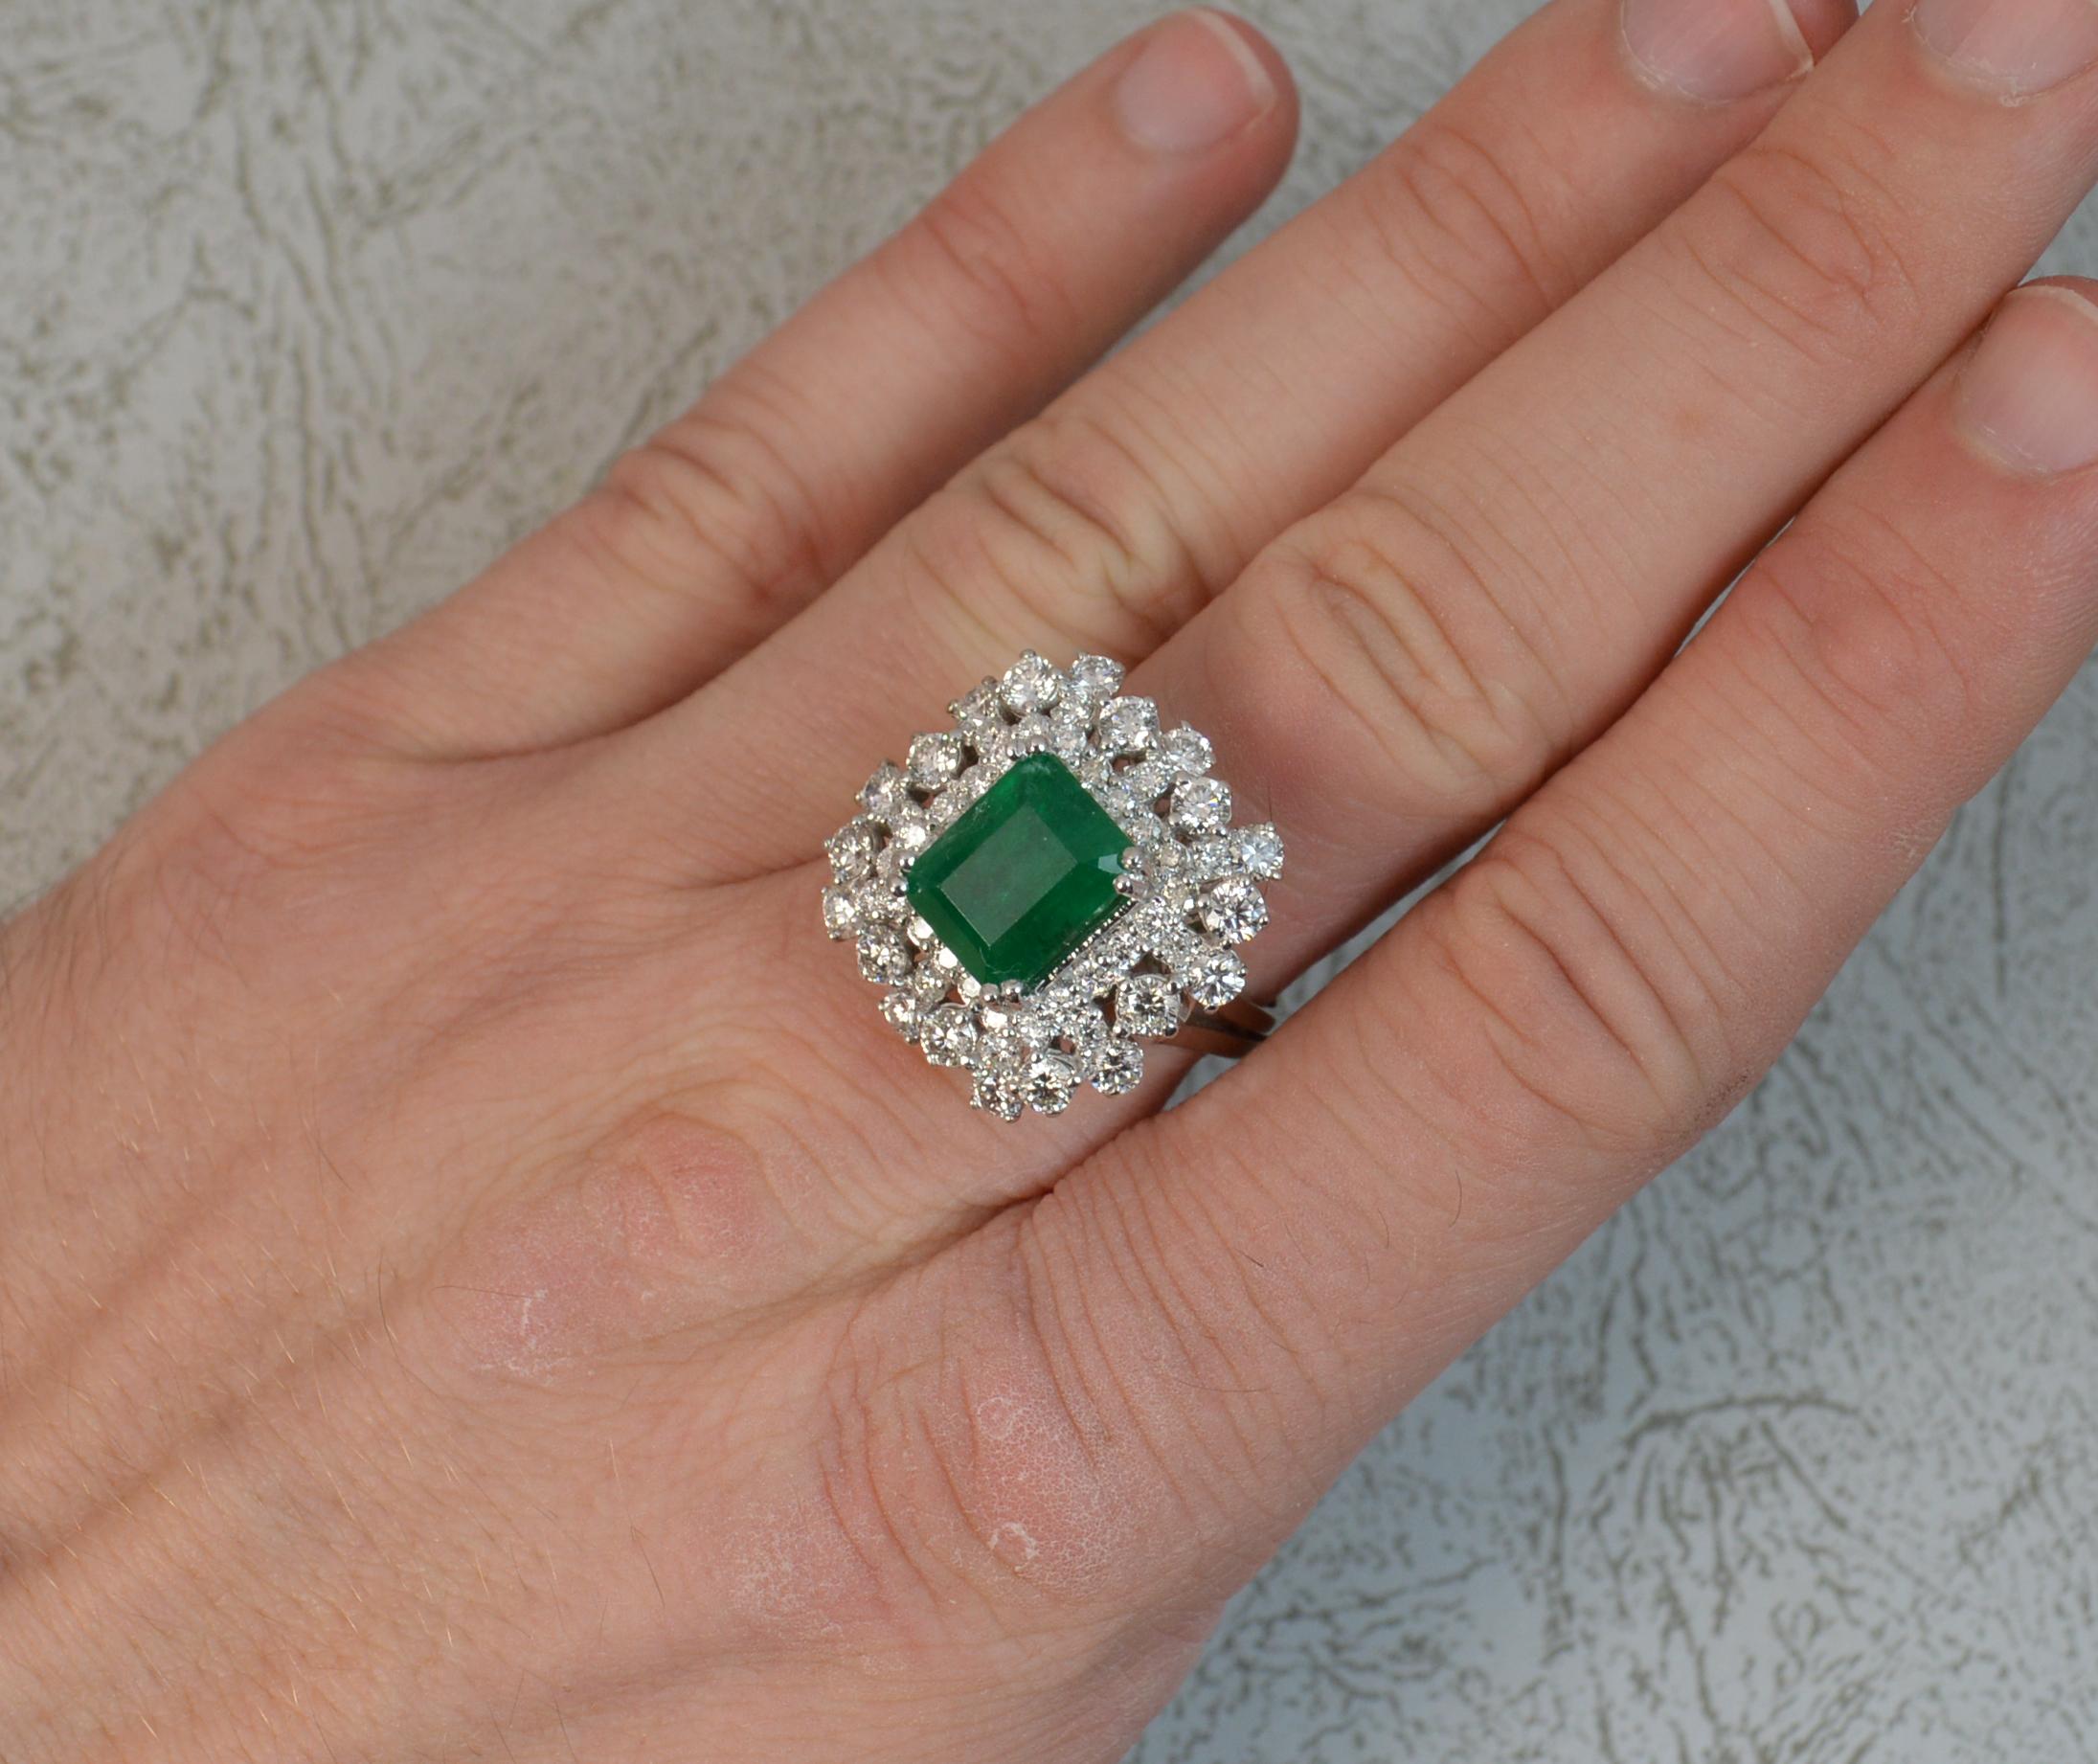 A superb 14ct White Gold, Emerald and Diamond cluster ring. A vintage piece of art deco design.
Designed with an emerald cut emerald to the centre in four double claw setting, 8.2mm x 10.3mm approx. 
Surrounding is multiple VS1 clarity, e-f colour